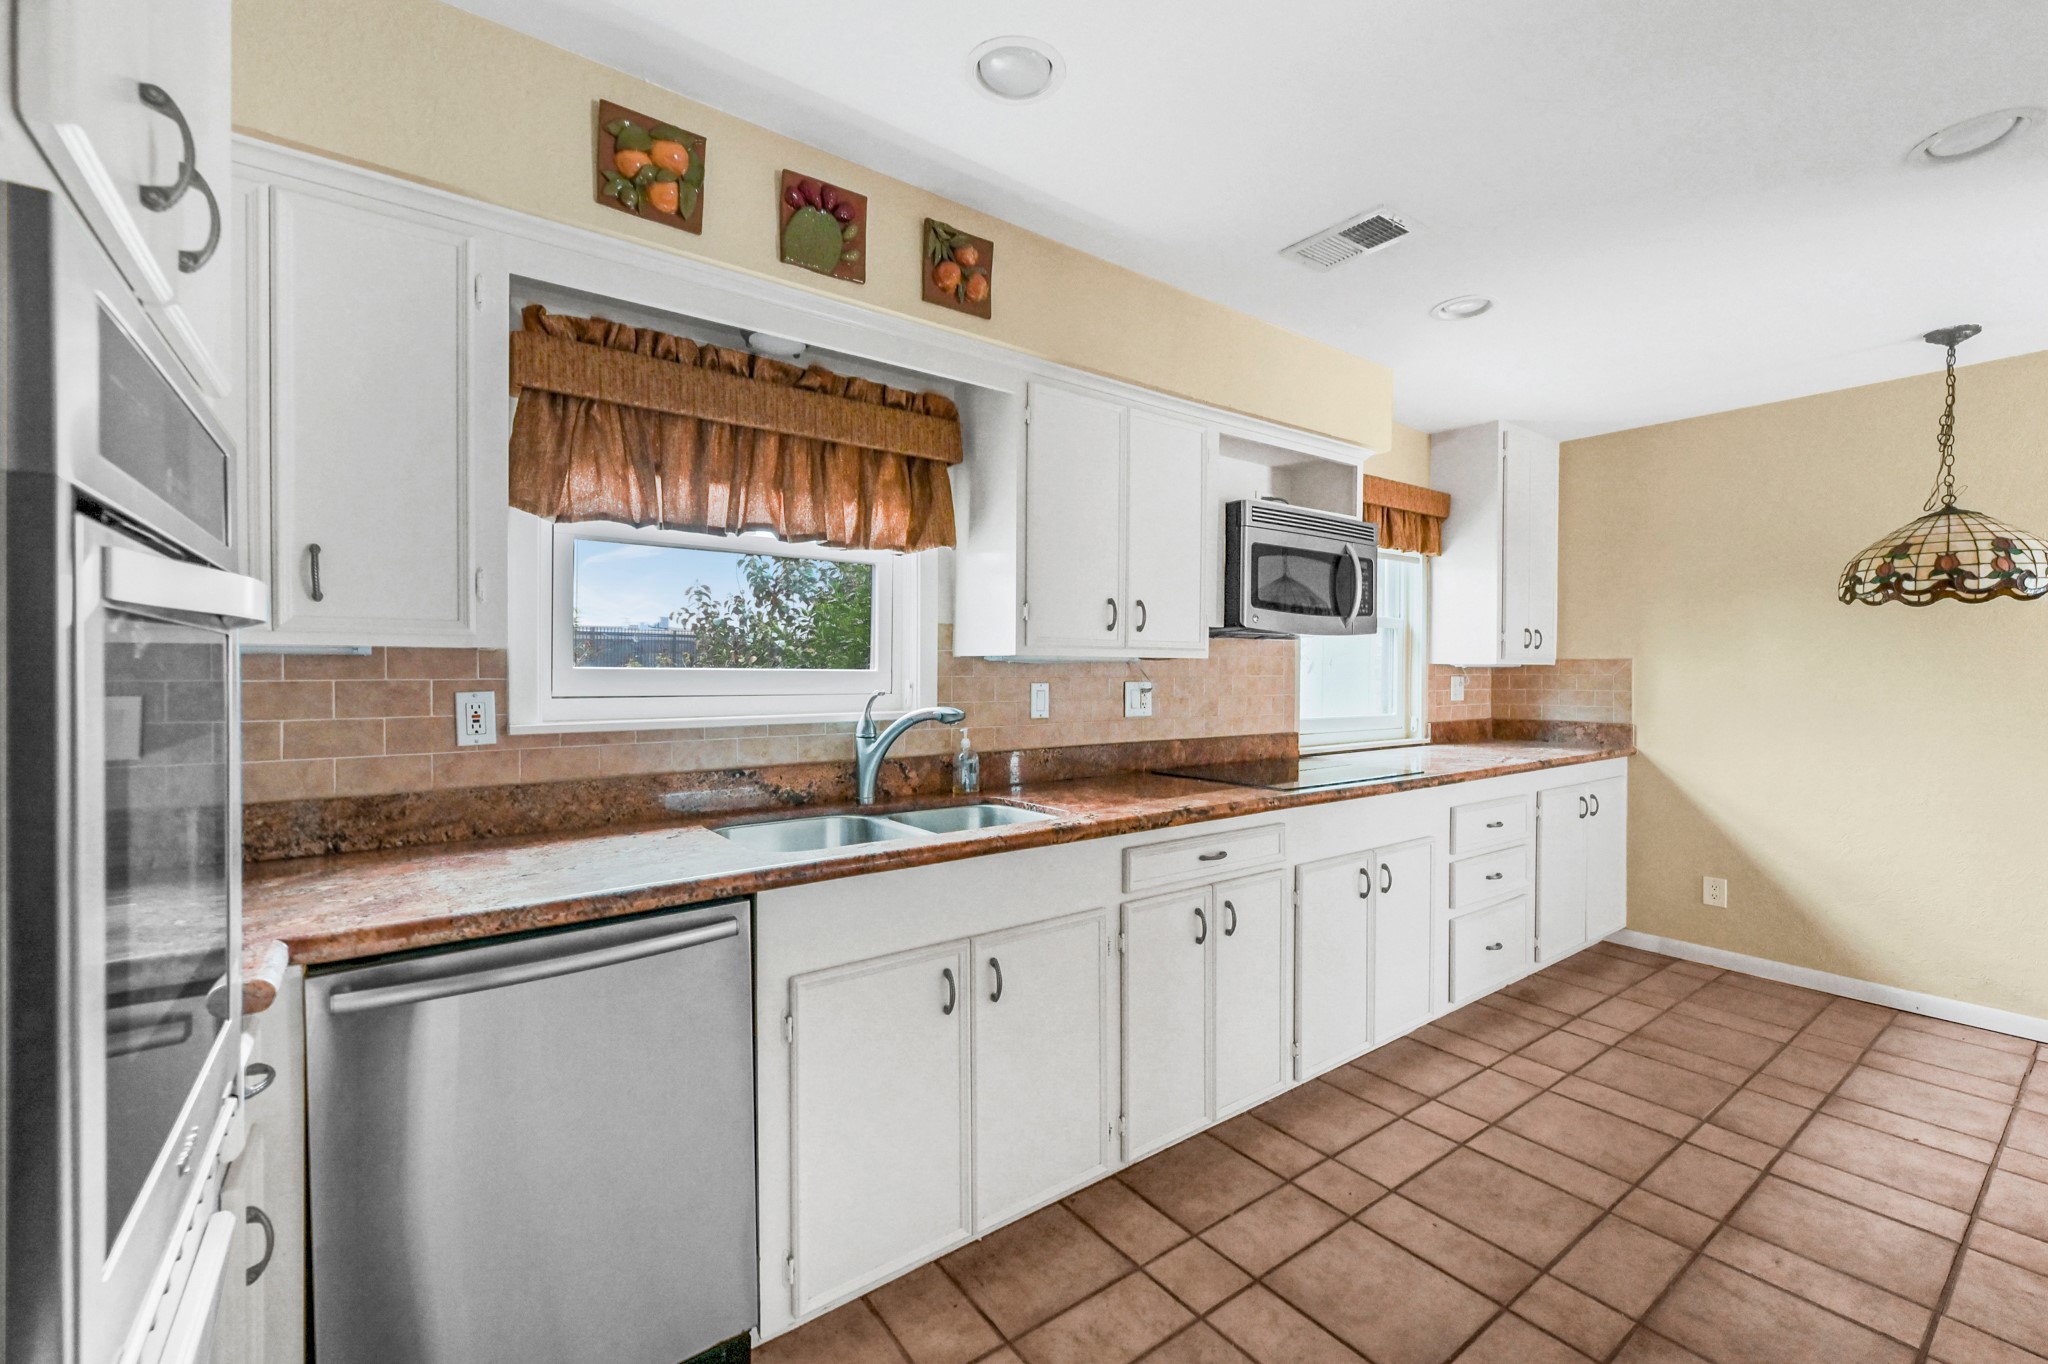 KITCHEN HAS BEEN UPDATED WITH GRANITE COUNTERS AND STAINLESS STEEL APPLIANCES, PLUS ELECTRIC COOKTOP.